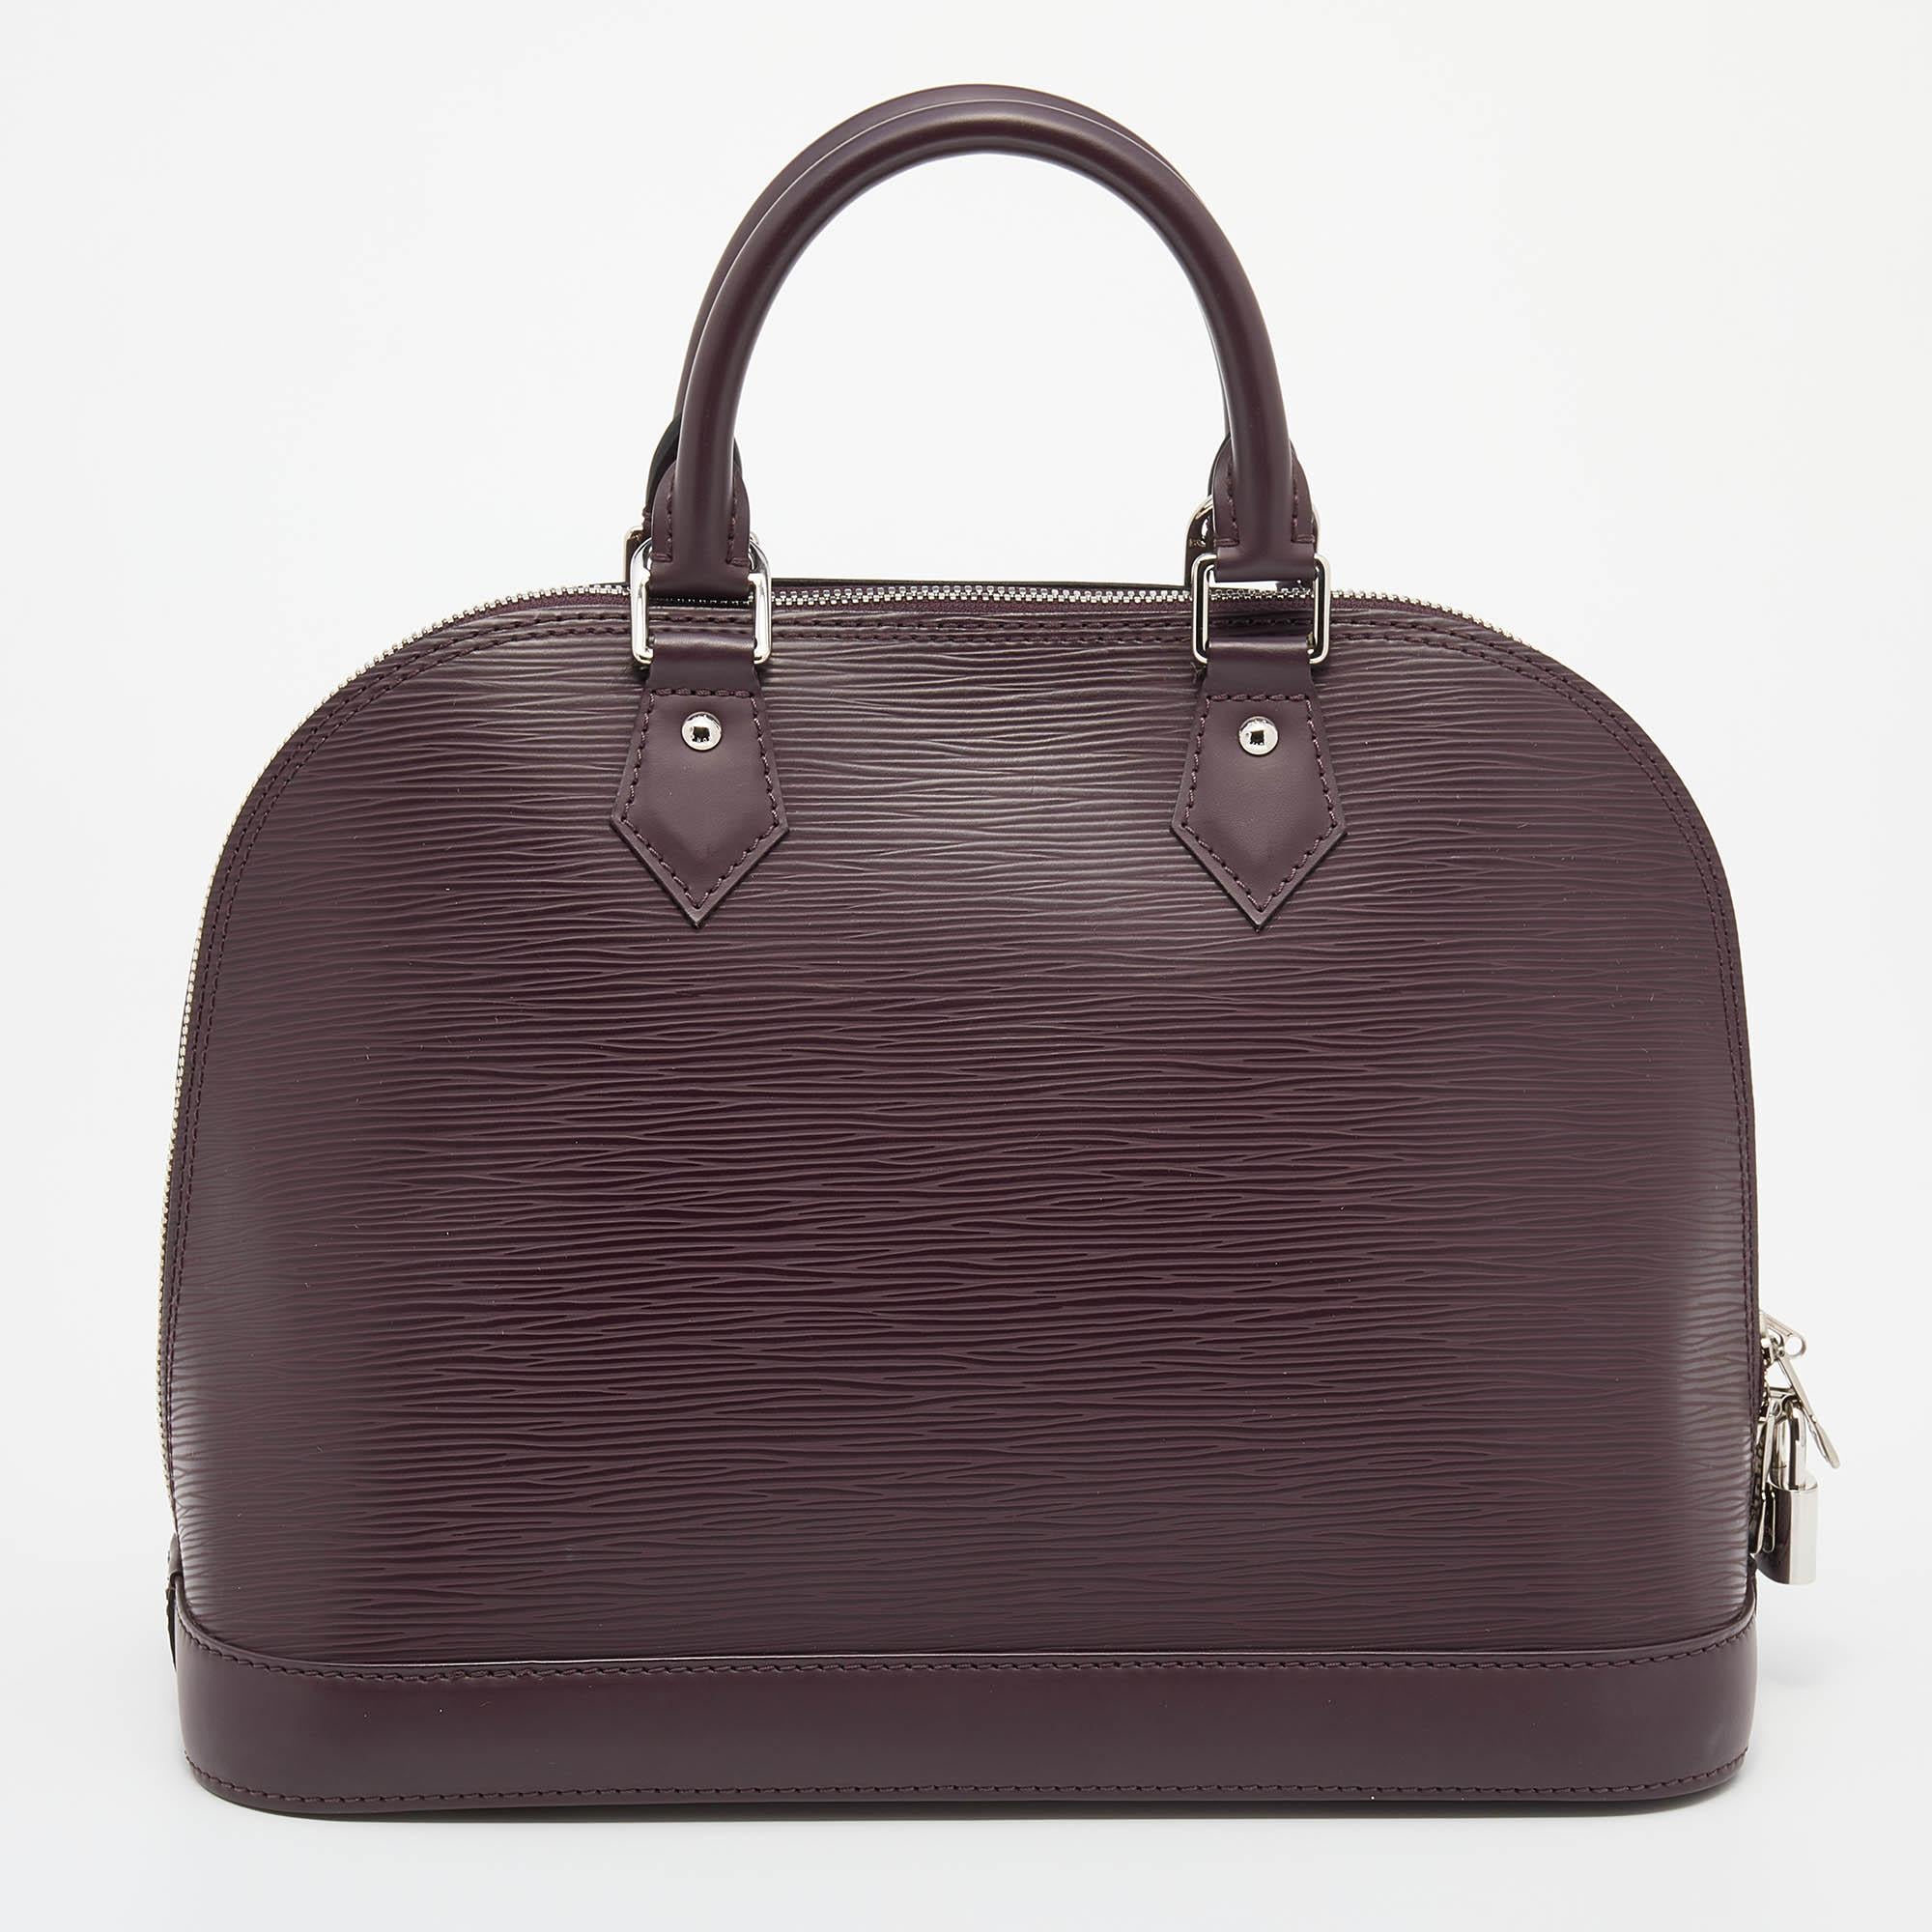 The Louis Vuitton Alma PM comes crafted from Epi leather, featuring double zippers with an Alcantara interior. Two handles are provided for you to elegantly parade it. Every closet deserves an Alma, including yours.

Includes: Original Dustbag, Info